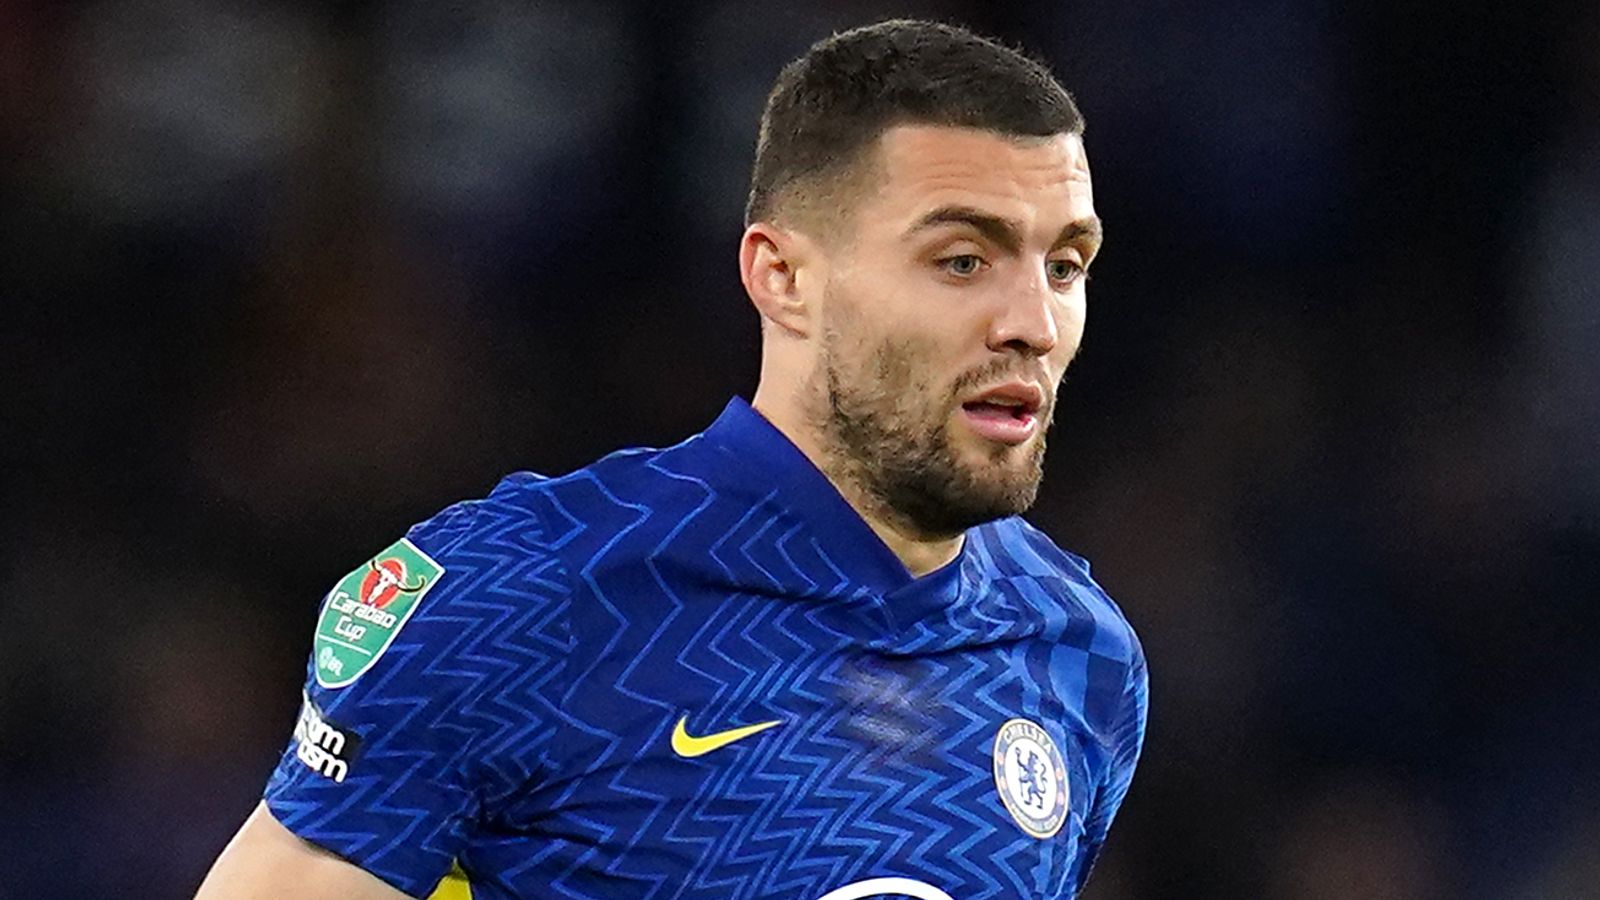 Chelsea: Mateo Kovacic tests positive for Covid-19 and misses Champions League visit to Zenit